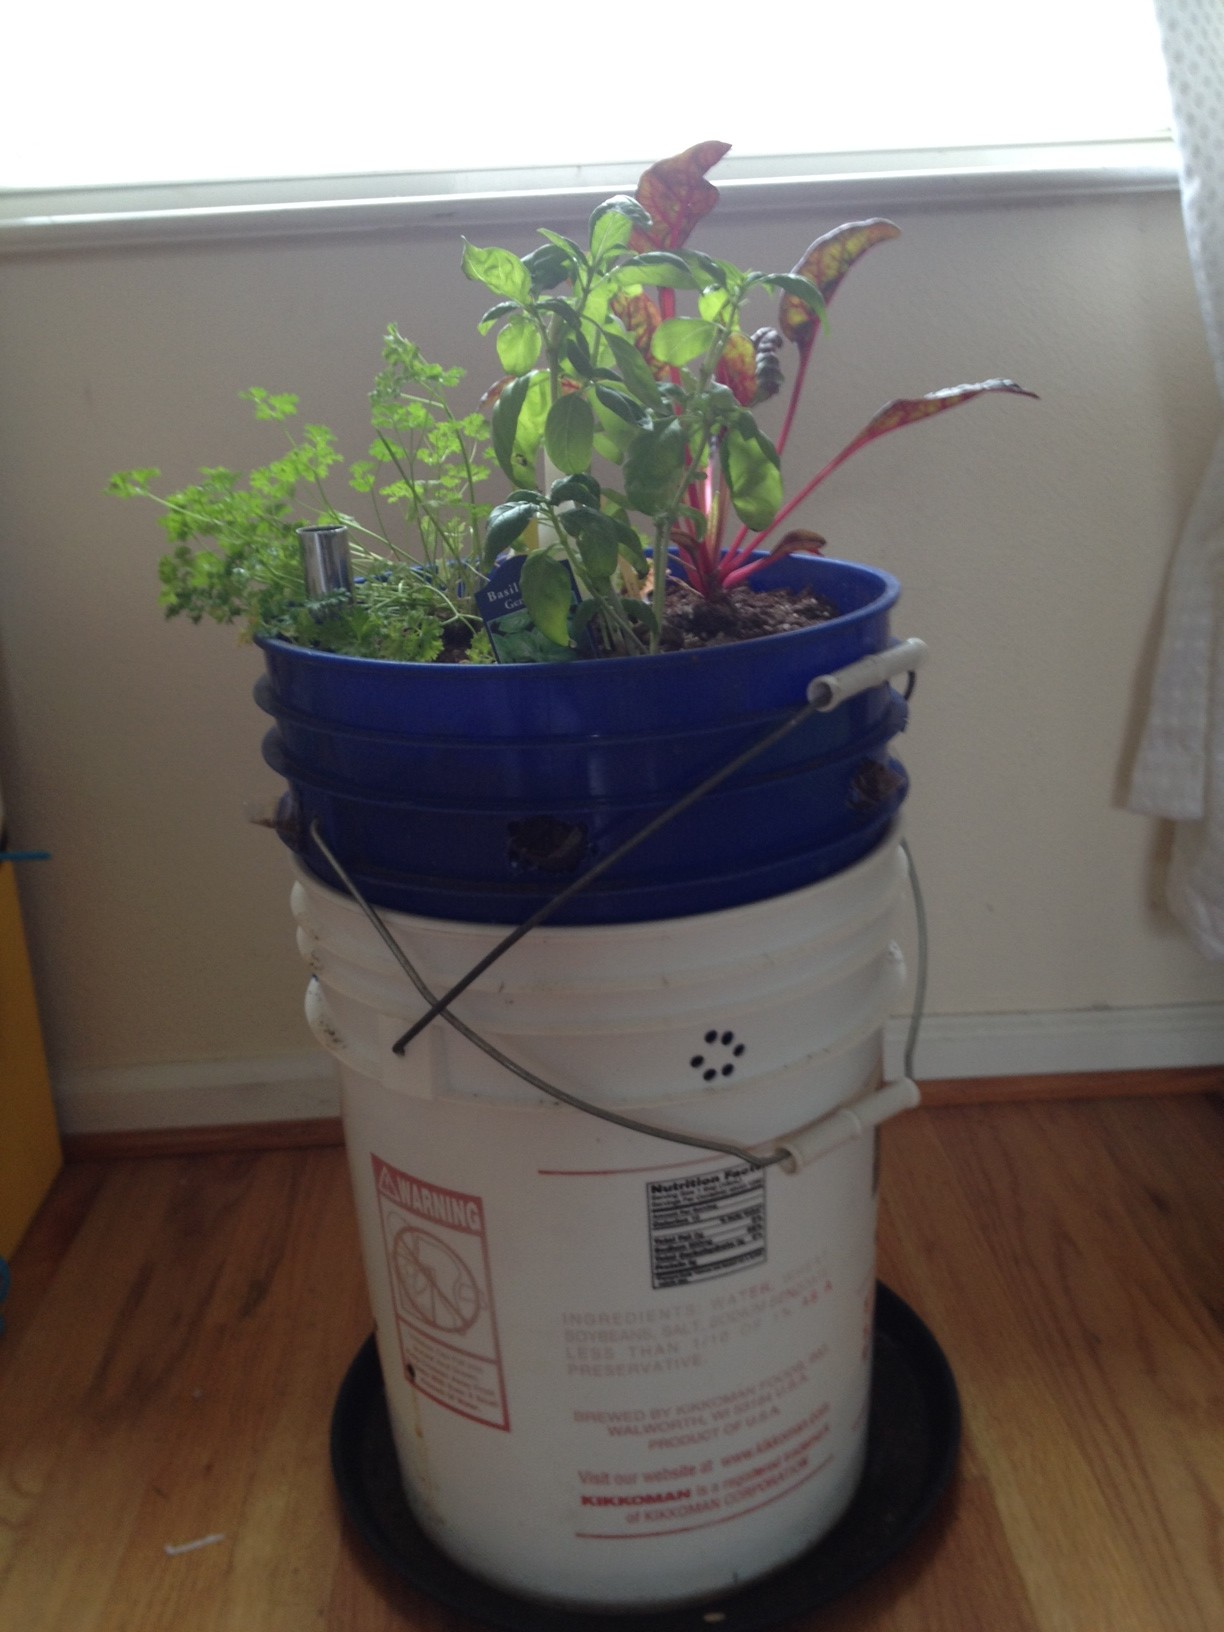 5 Gallon Bucket Planter Food Is Free Project